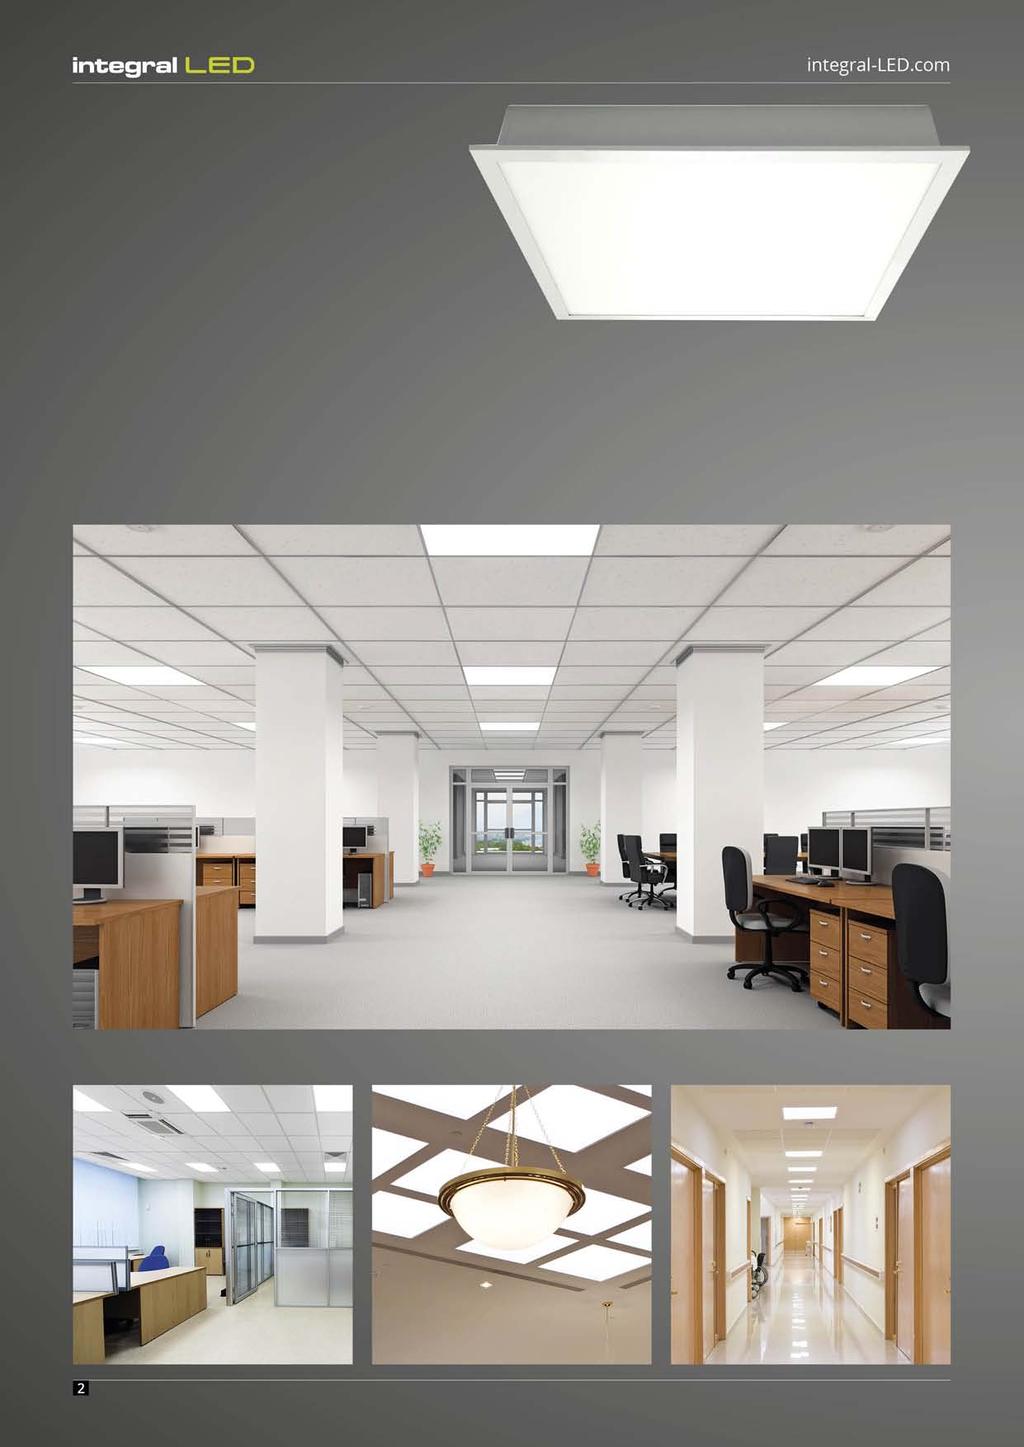 Panels Integral retrofit LED panels are an easy-to-install replacement for less efficient fluorescent tube panels. Not only are LED panels more efficient; they also last longer (50,000 hrs.